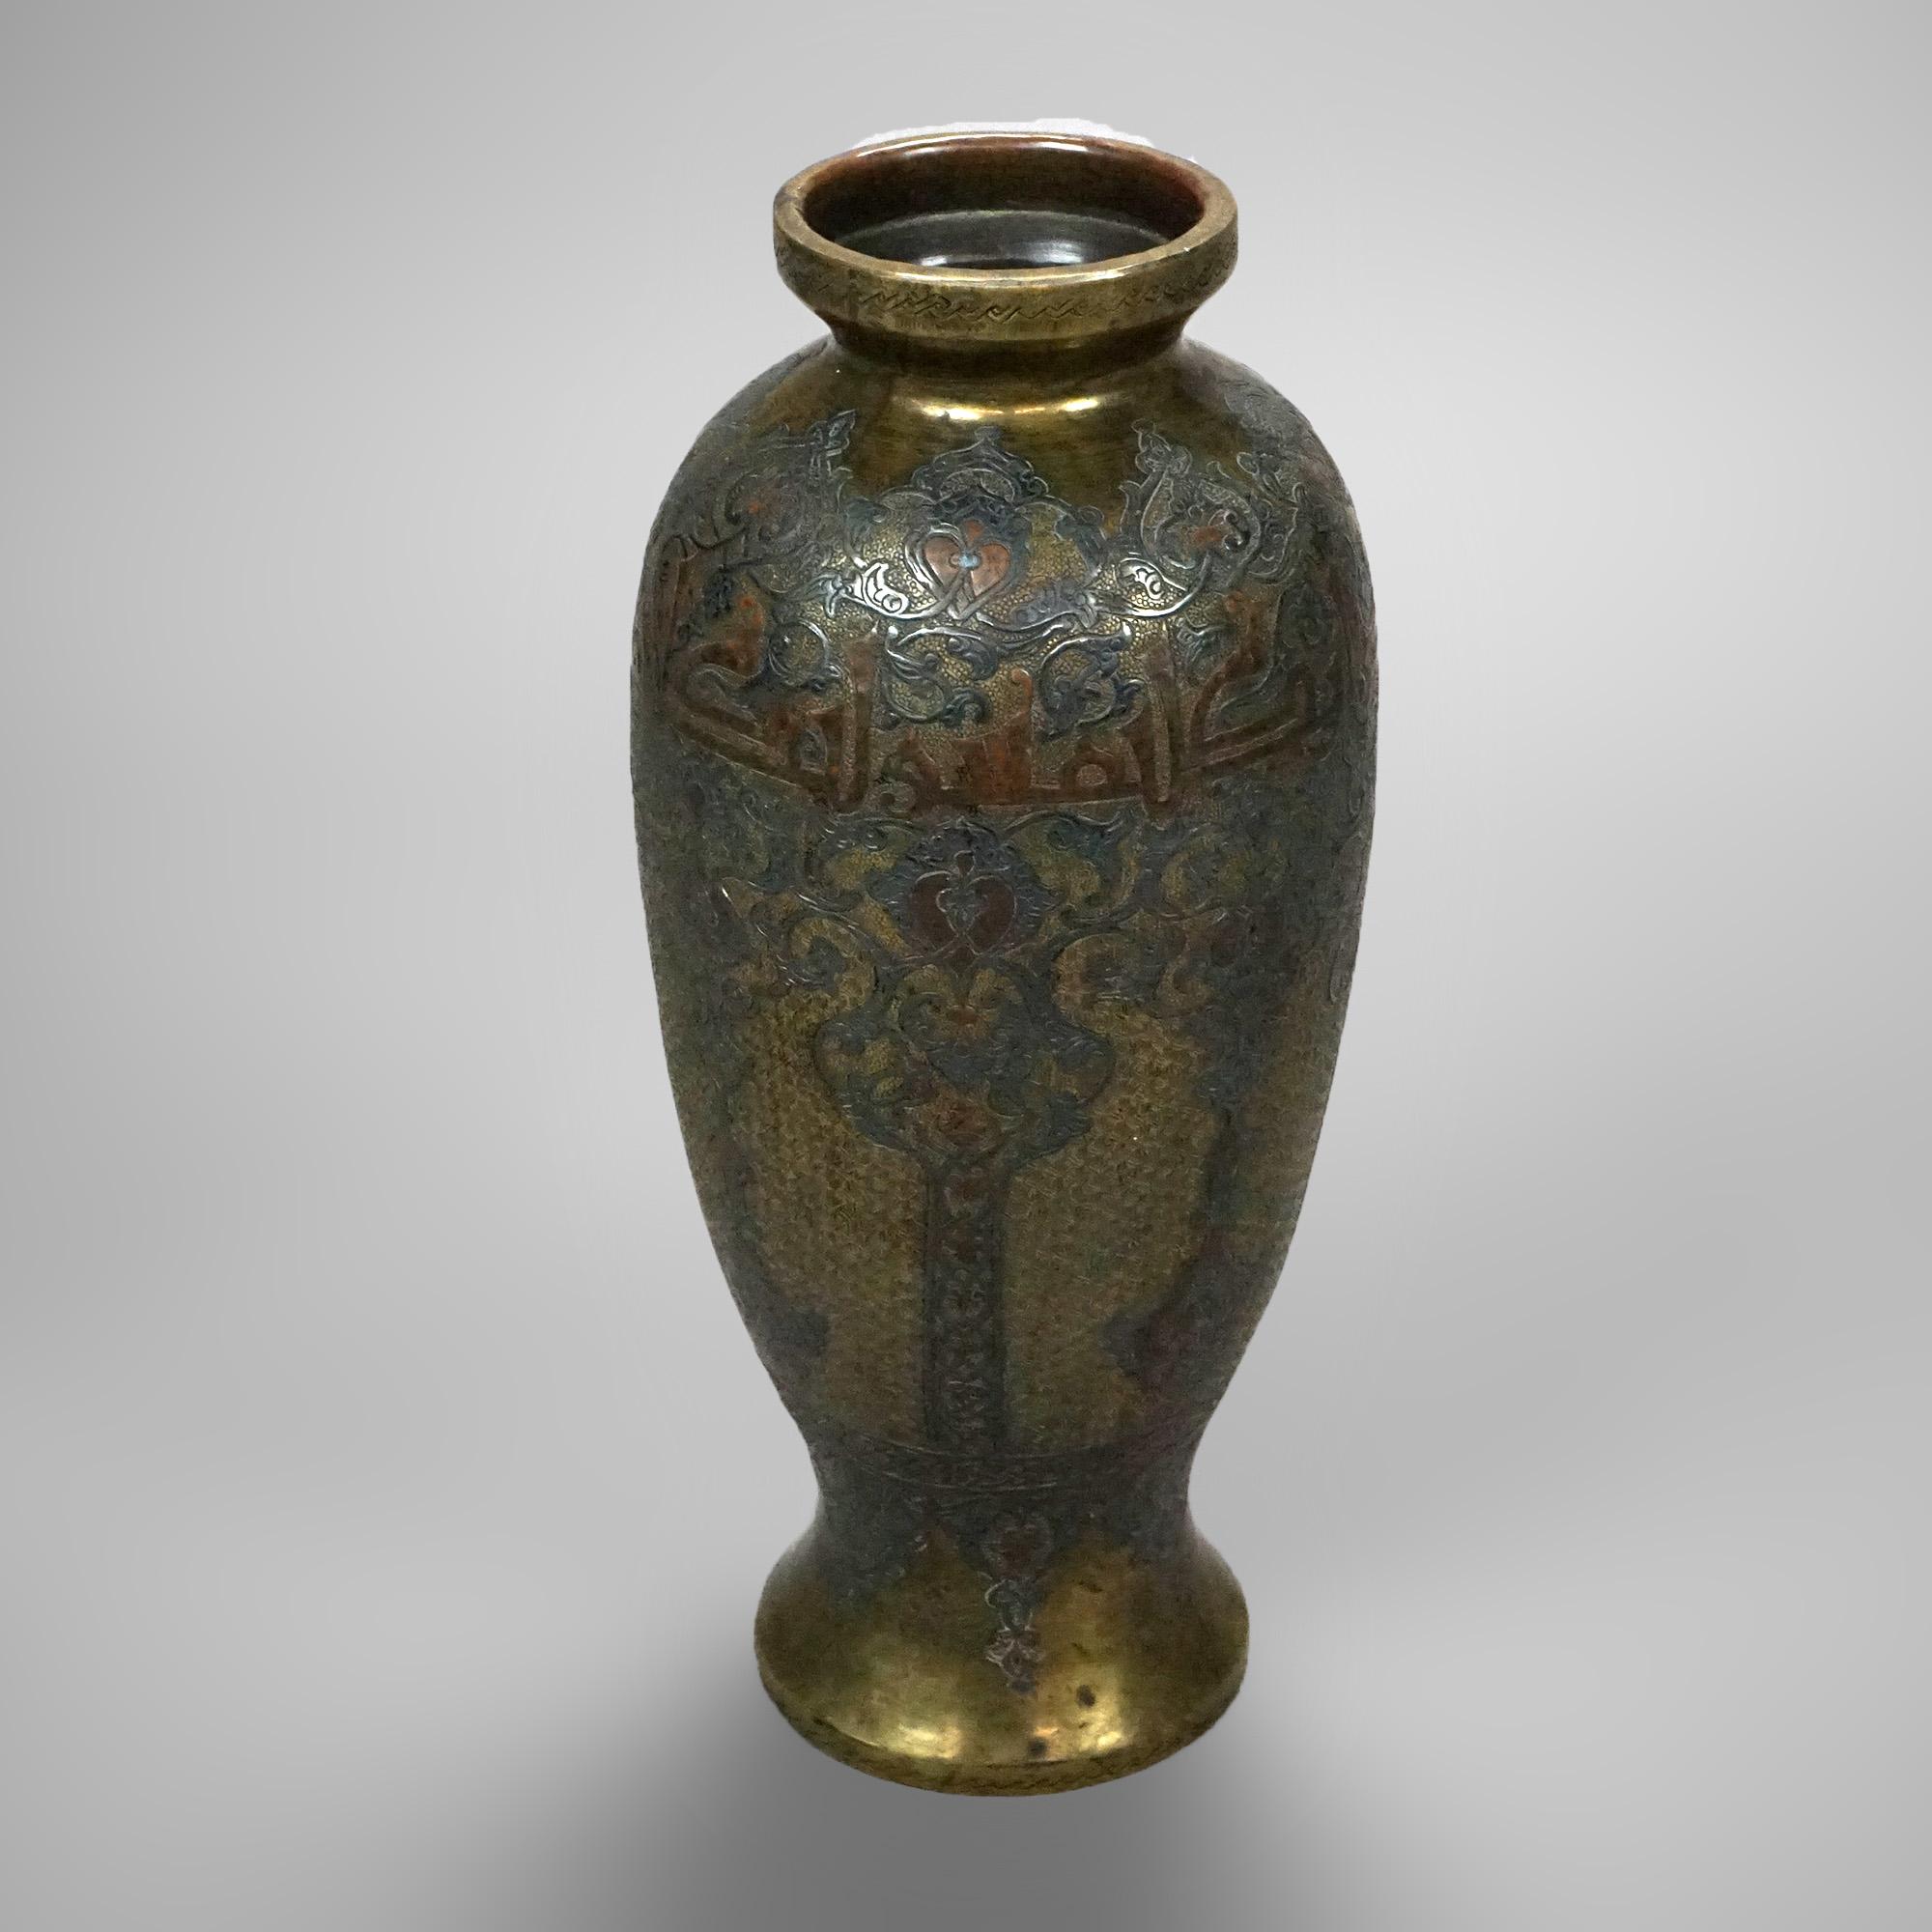 An antique Persian vase offers silver and copper inlay with foliate and floral design in bronze vessel, stamped as photographed, 18-19th C

Measures- 11.75'' H x 5'' W x 5'' D.